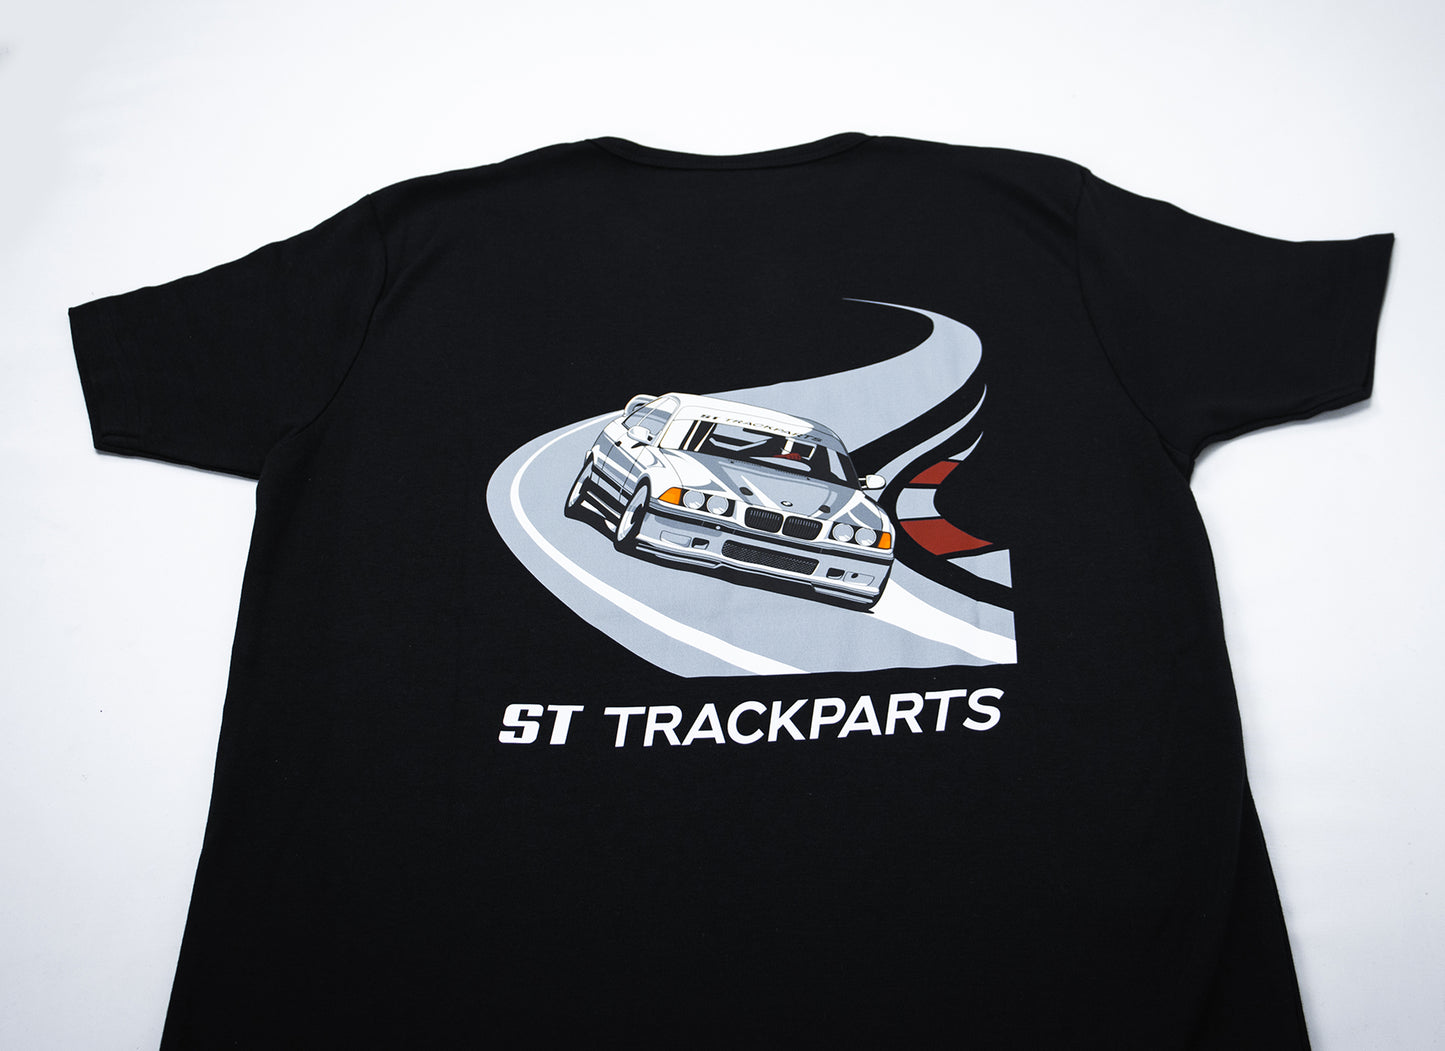 ST-Trackparts T-shirt